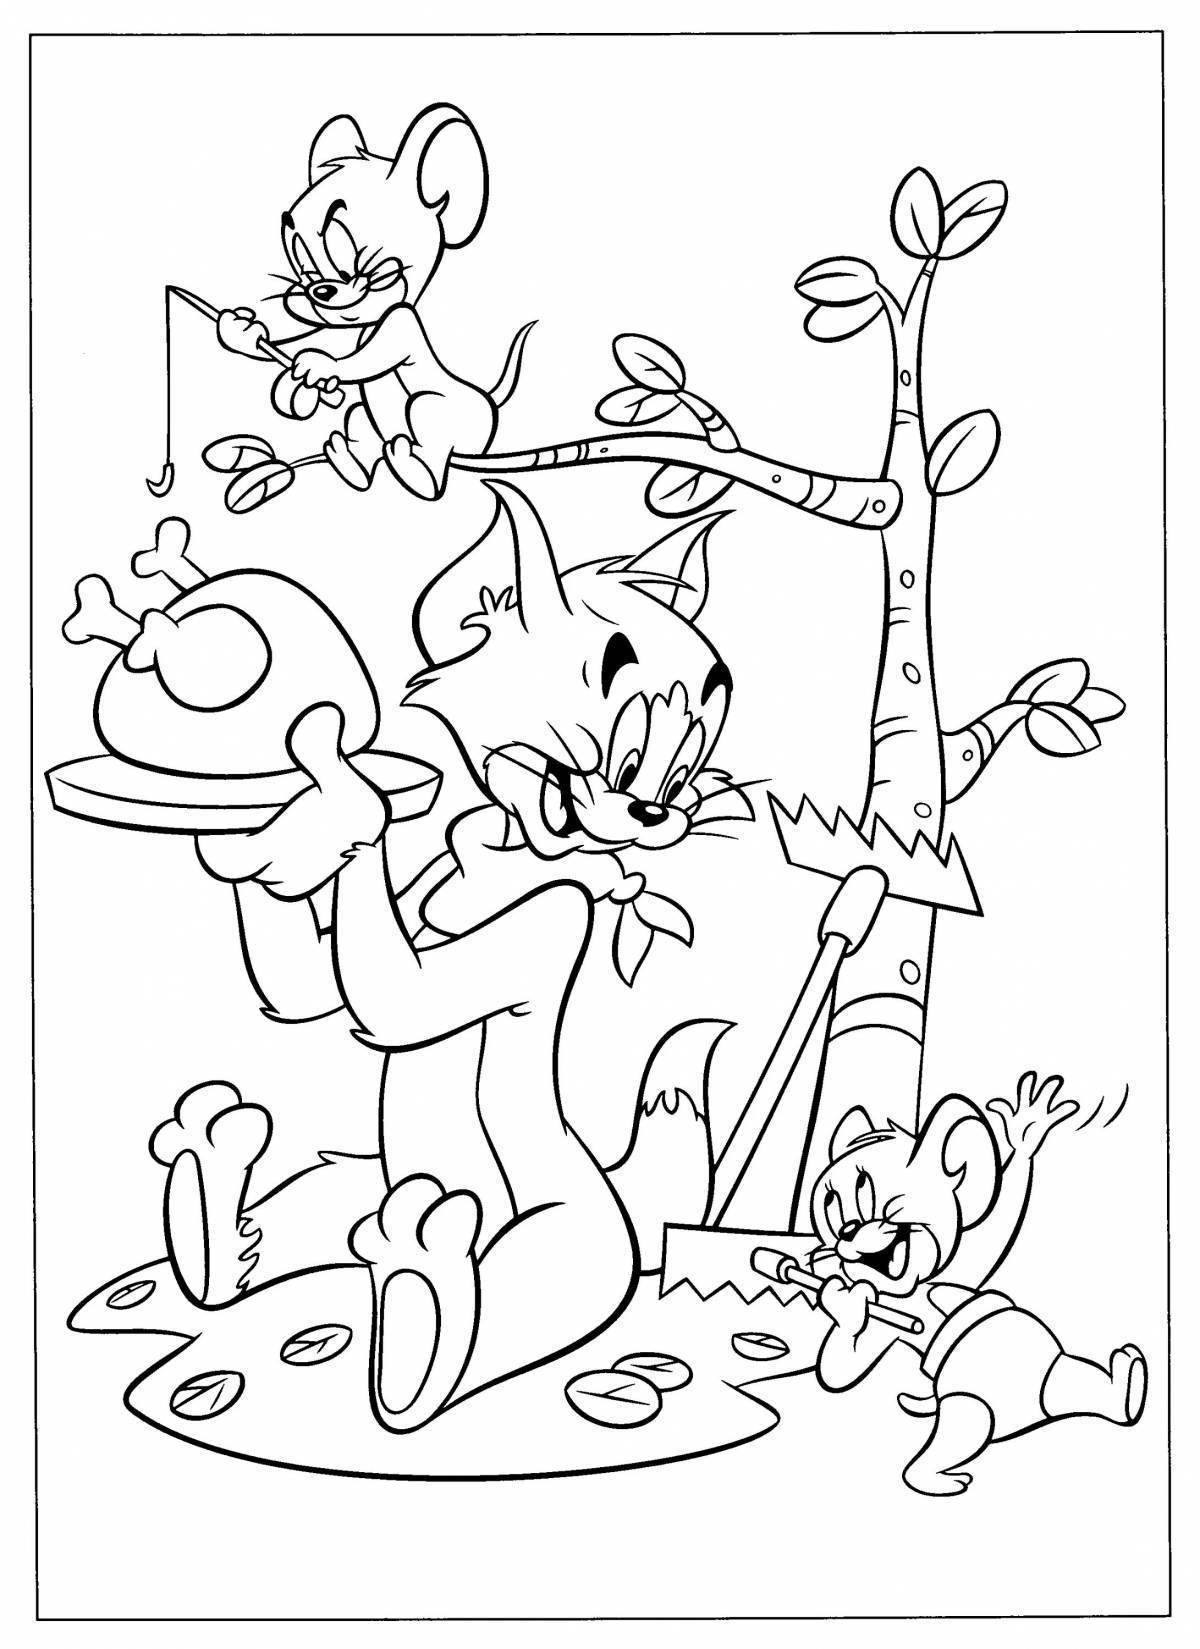 Jerry holiday coloring book